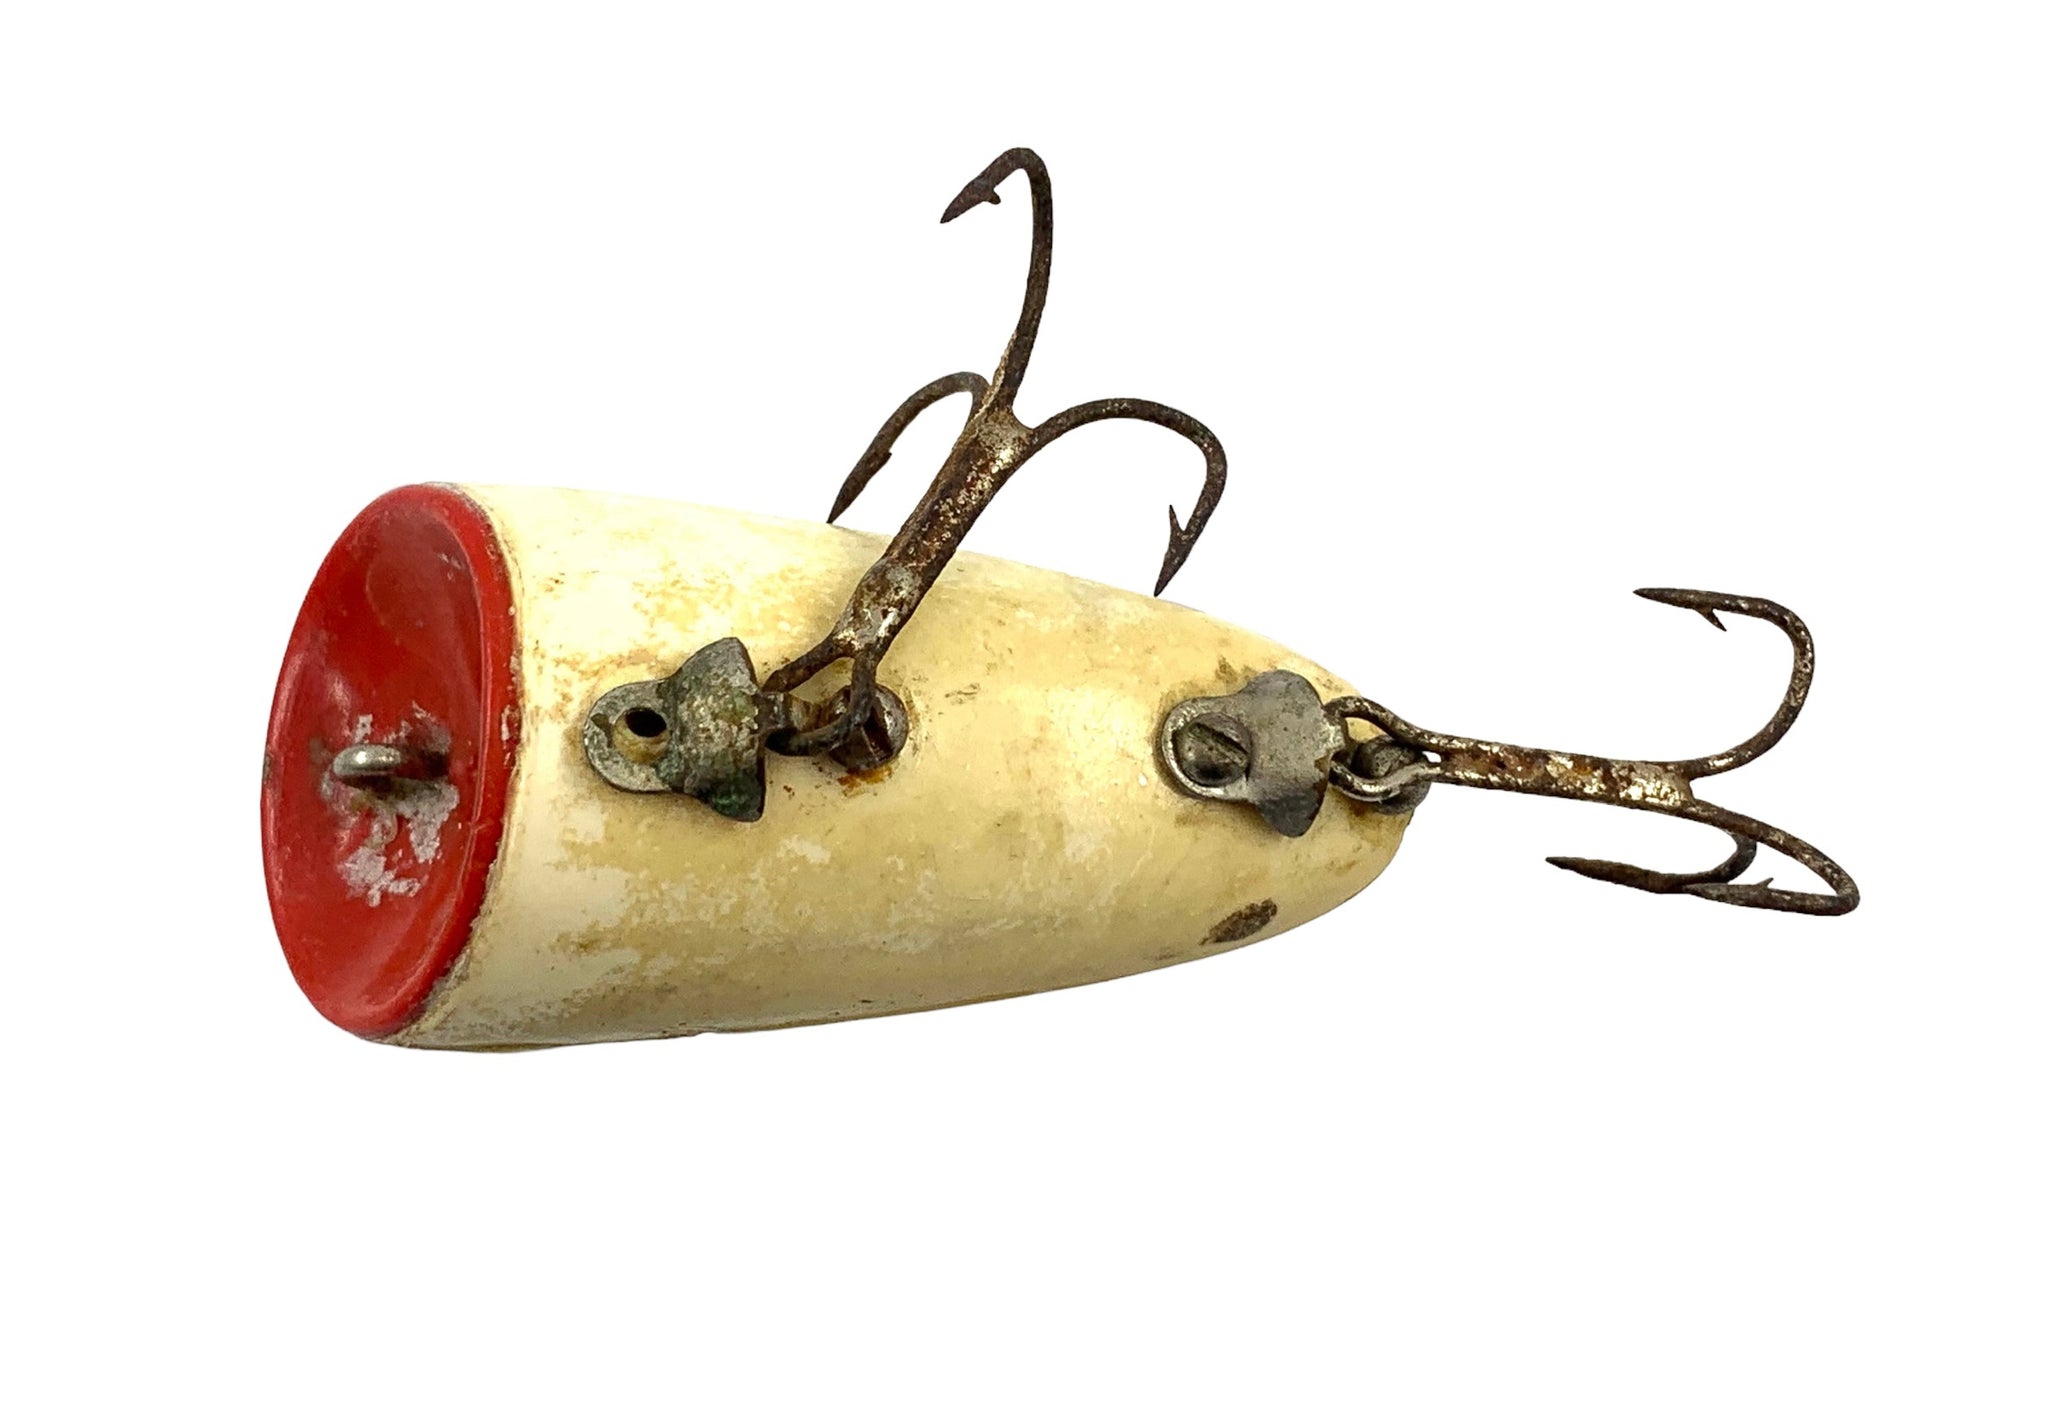 BROOK'S BAITS NO. 5 Topwater Popper Fishing Lure • FROG – Toad Tackle